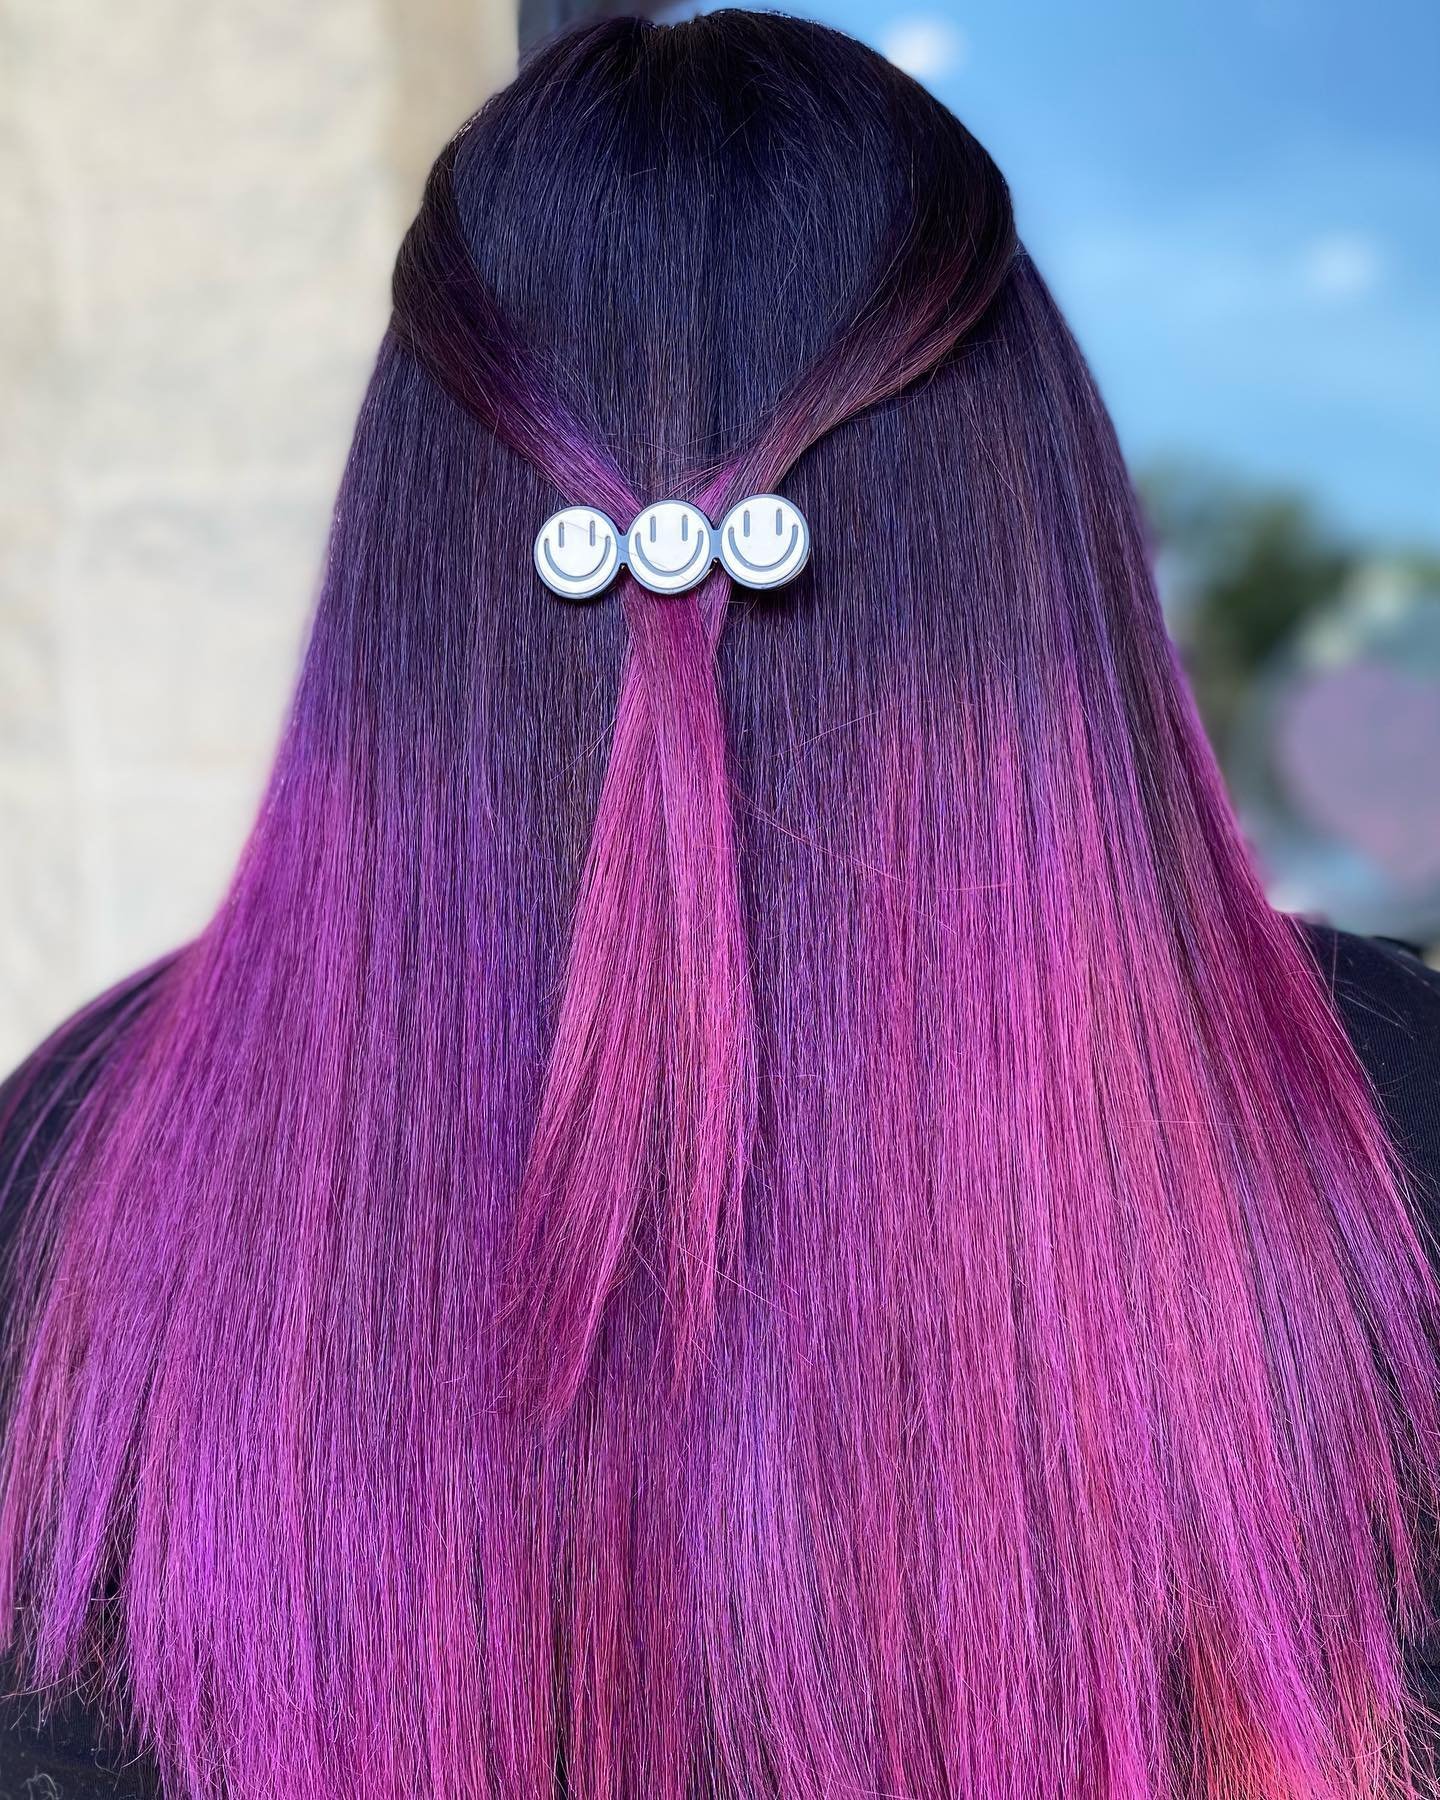 From purple dreams to pink perfection, let your hair tell a vibrant story 💜💖